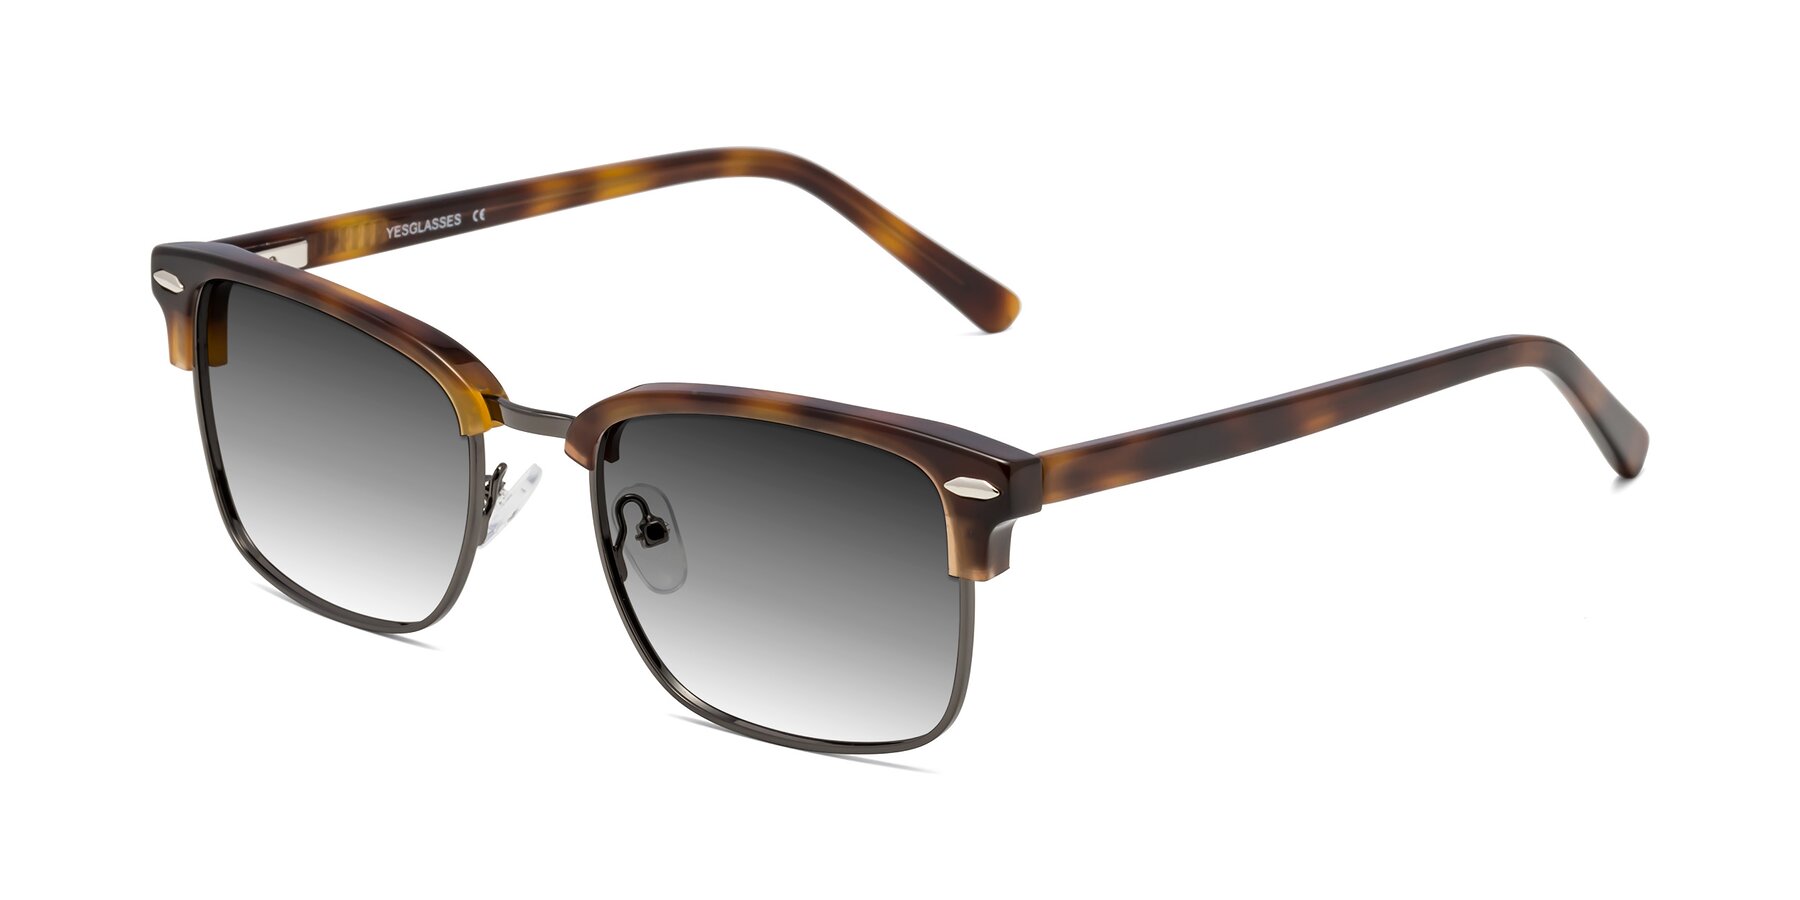 Angle of 17464 in Tortoise/ Gunmetal with Gray Gradient Lenses